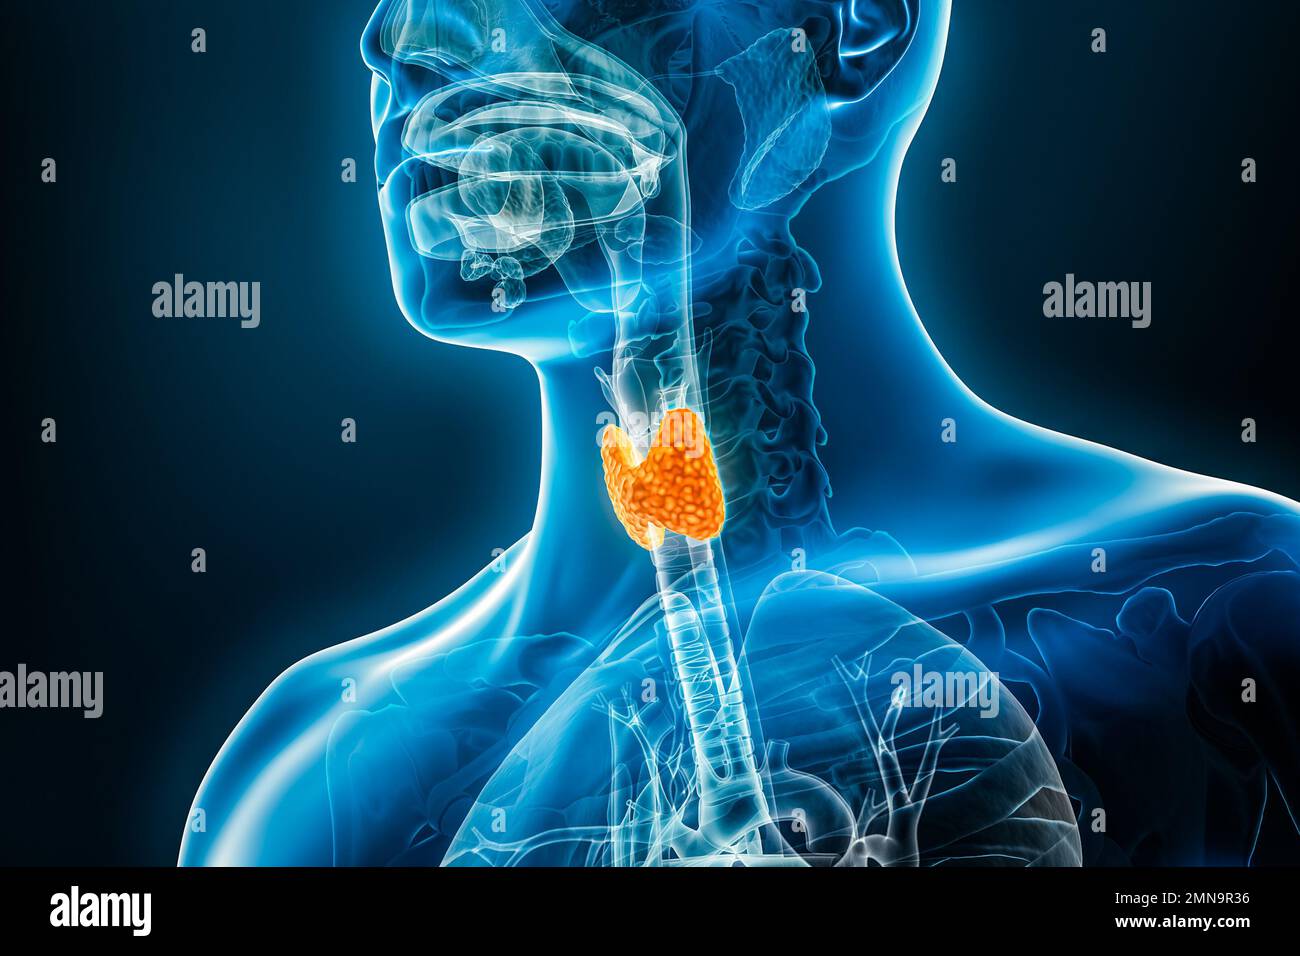 Xray thyroid gland organ 3D rendering illustration with male body contours. Human anatomy, medical, endocrine system, biology, science, healthcare con Stock Photo